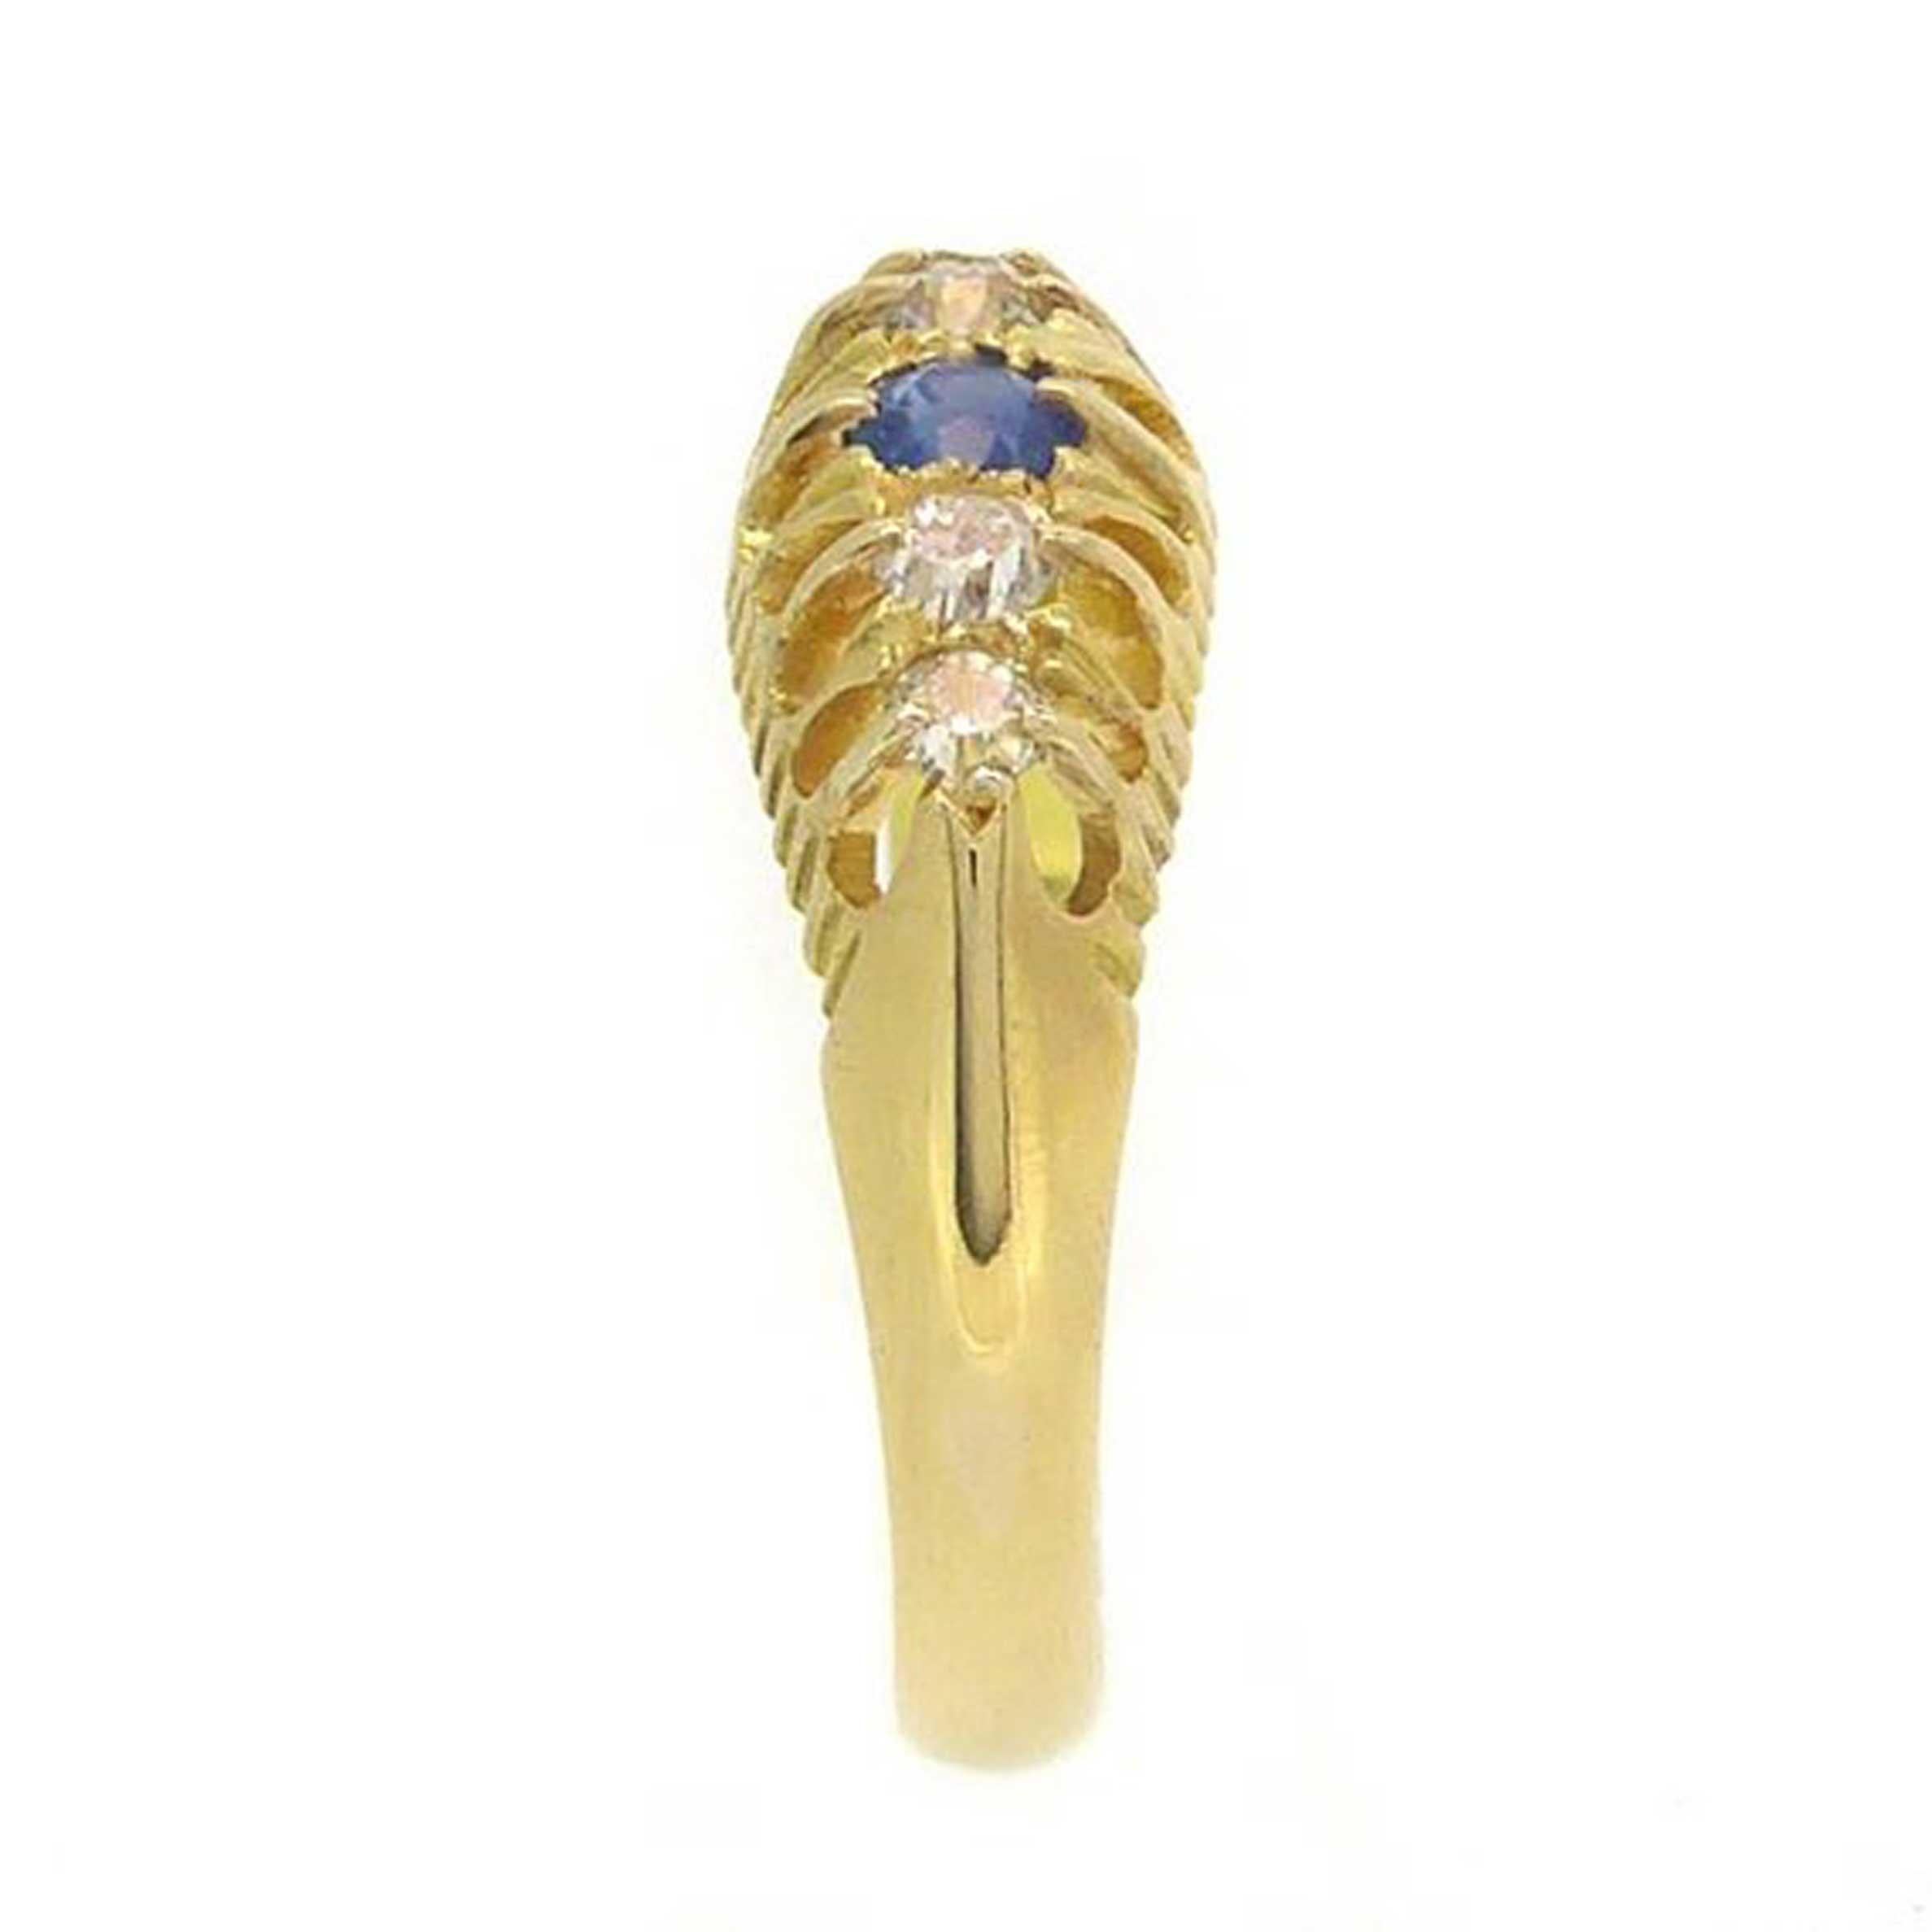 Set to the centre with a round sapphire of gorgeous blue hue and flanked on each side by two old European cut diamonds, this a truly delightful old ring from the English George V era. Claw set above a pierced gallery the gemstones shimmer via the